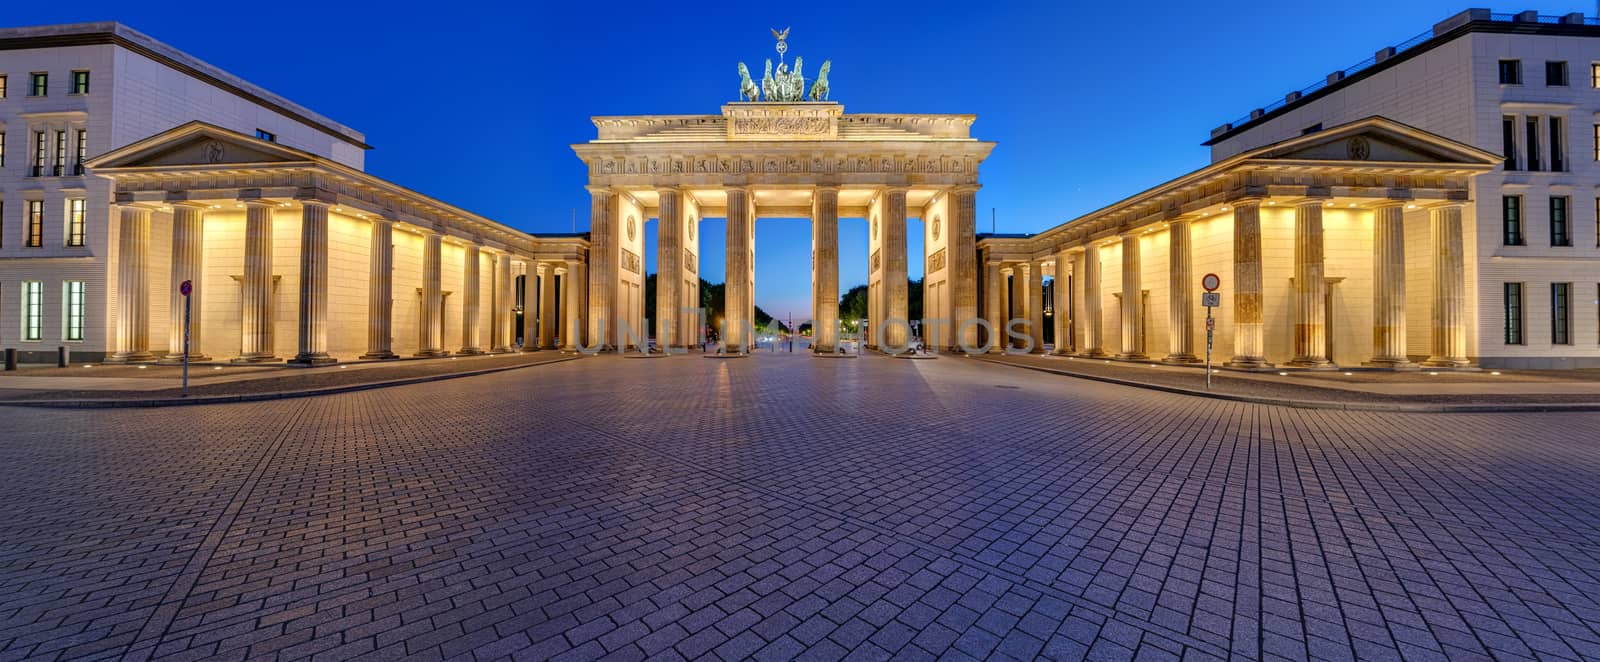 Panorama of the illuminated Brandenburg Gate in Berlin after sunset with no people